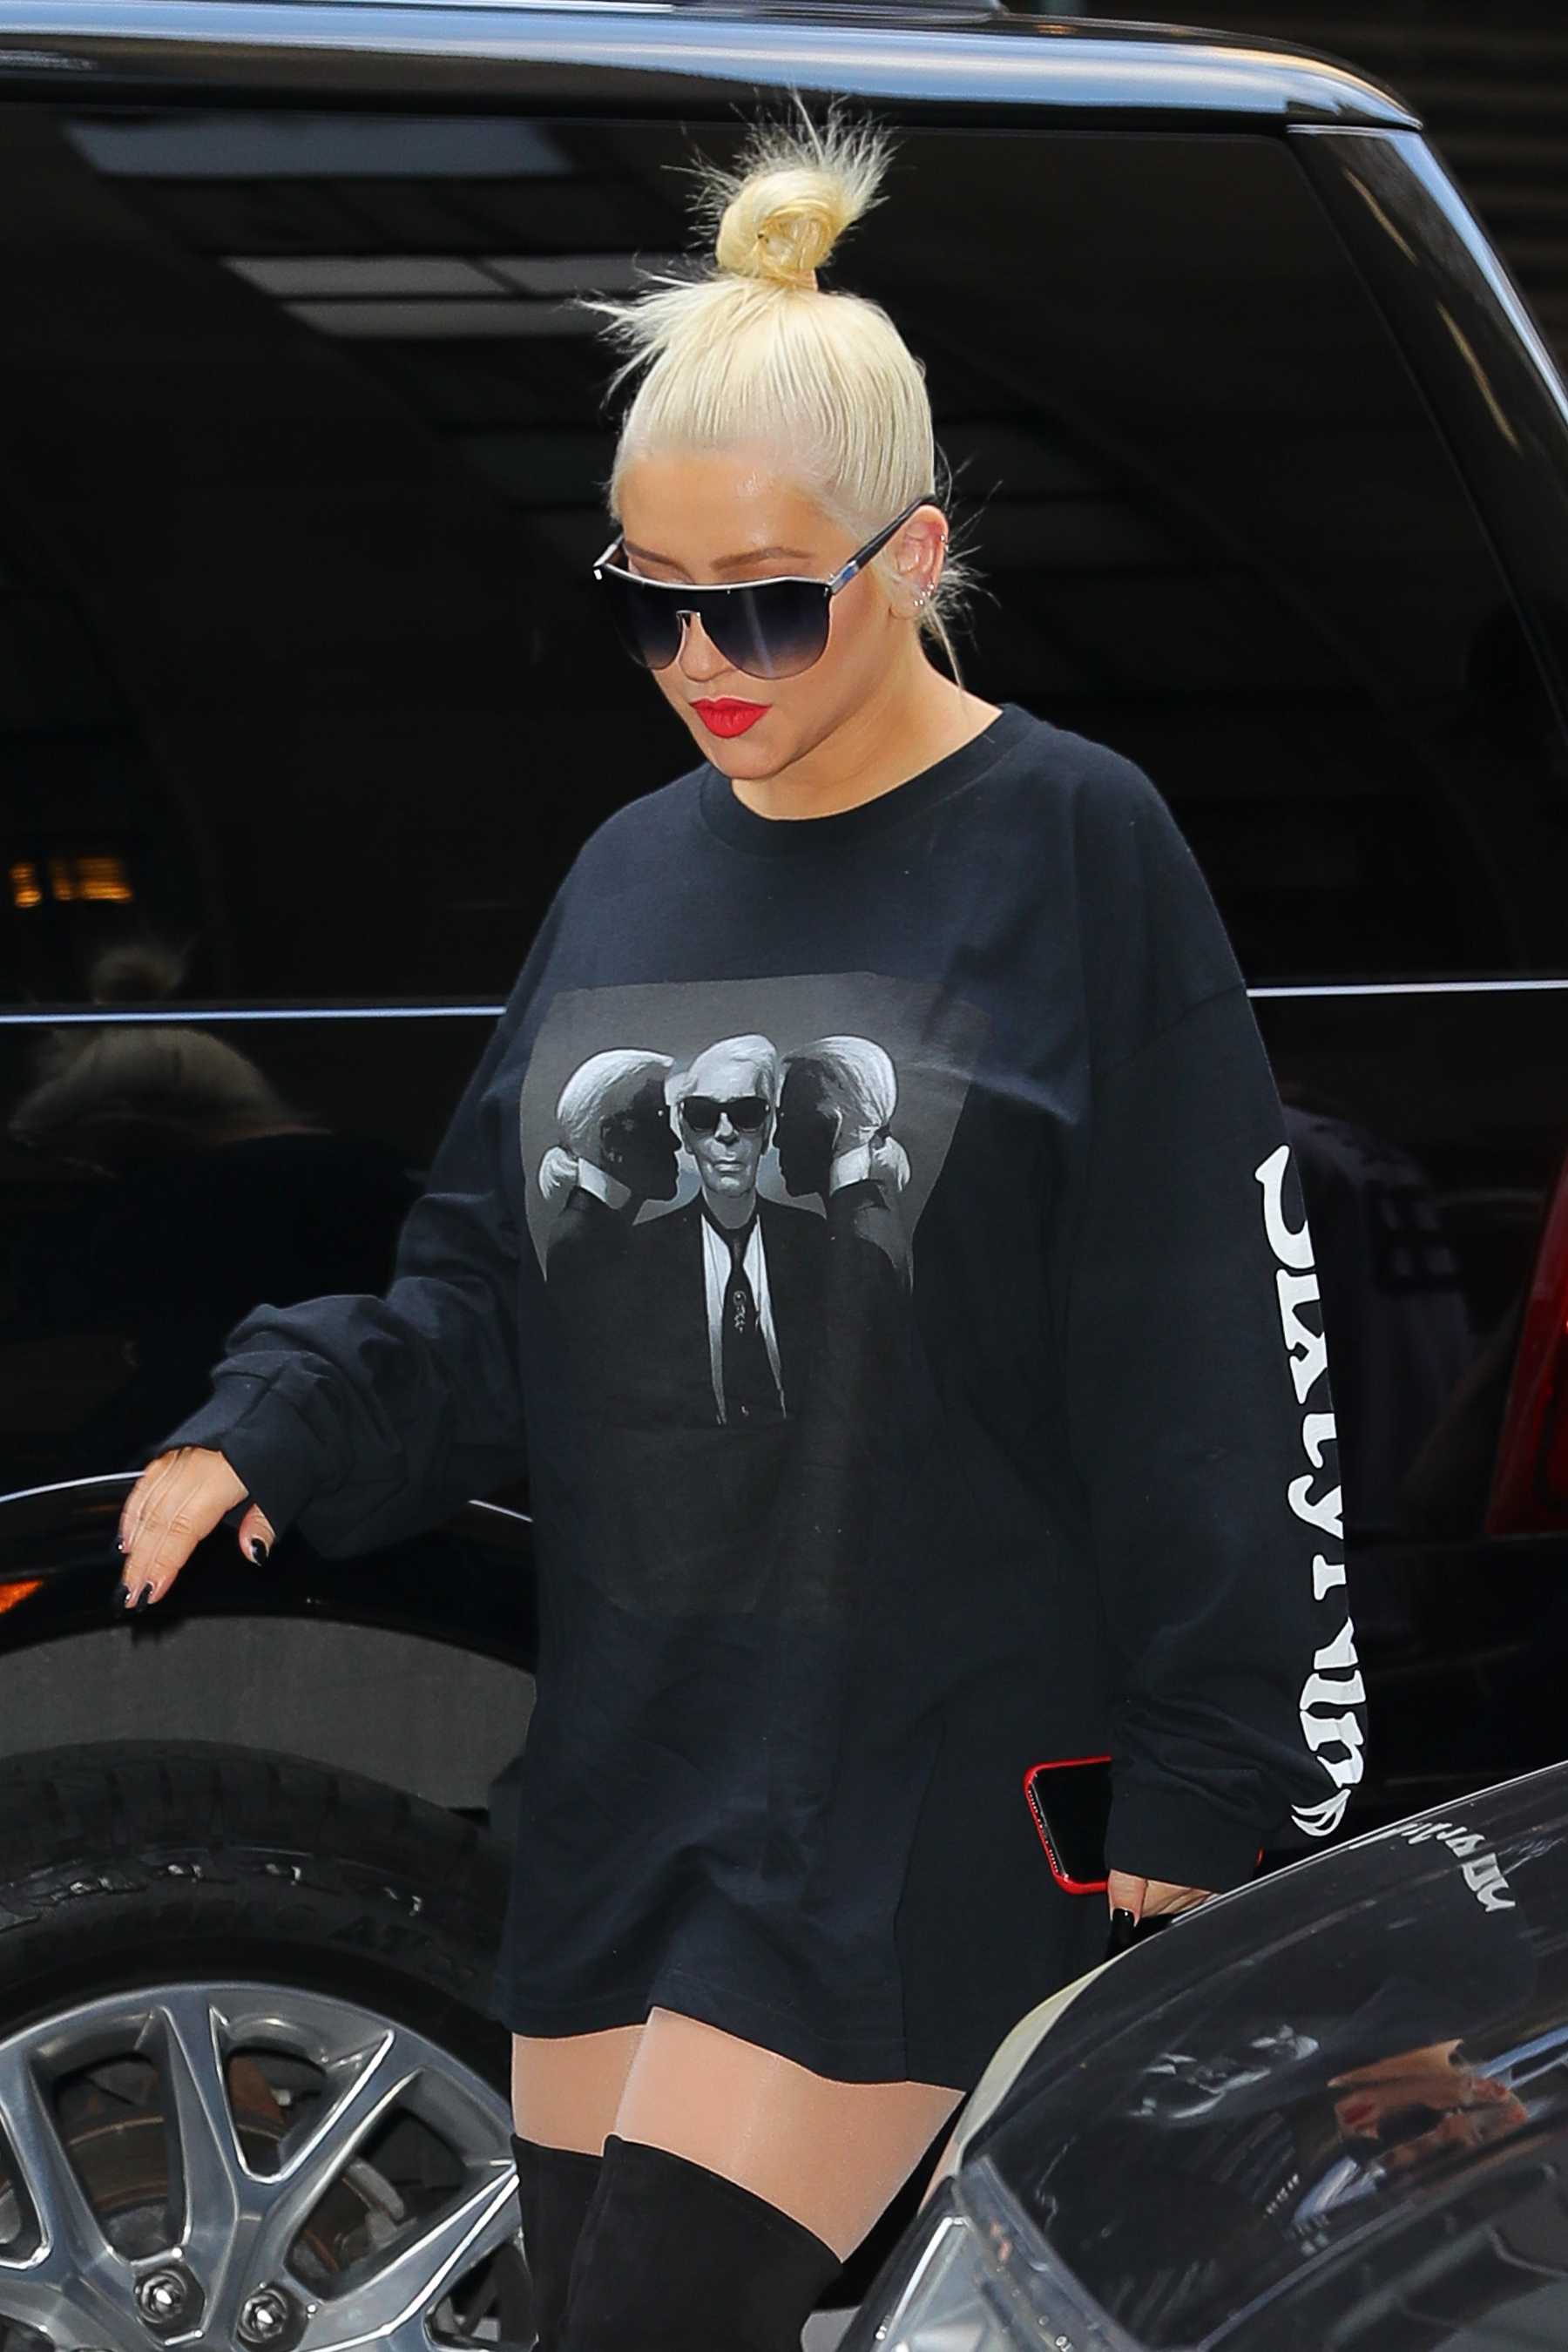 Christina_Aguilera_-_out_and_about_in_New_York_City_10032018-09.jpg